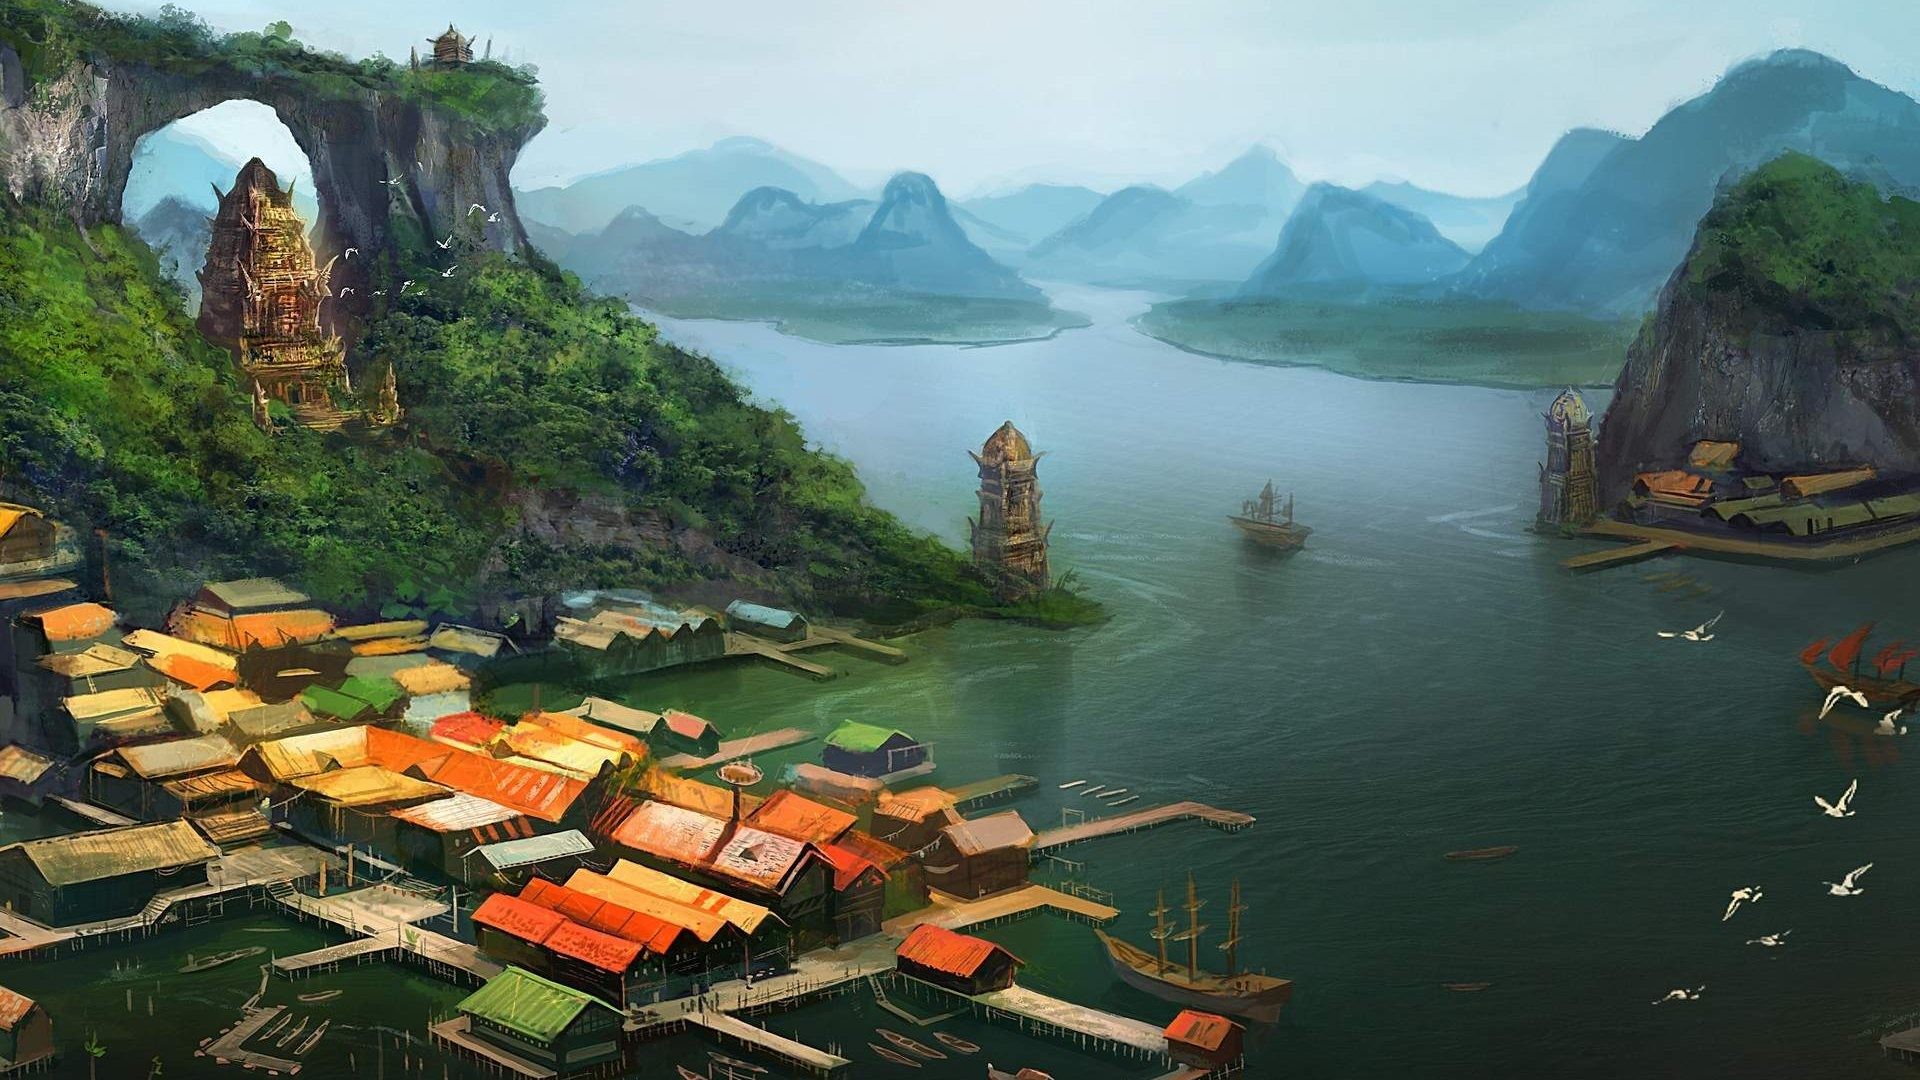 digital art, Fantasy art, Architecture, Building, House, Artwork, Painting, Rooftops, Village, Asian architecture, Lake, Mountains, Birds, Pier, Tower, Ship, Nature, Trees Wallpaper